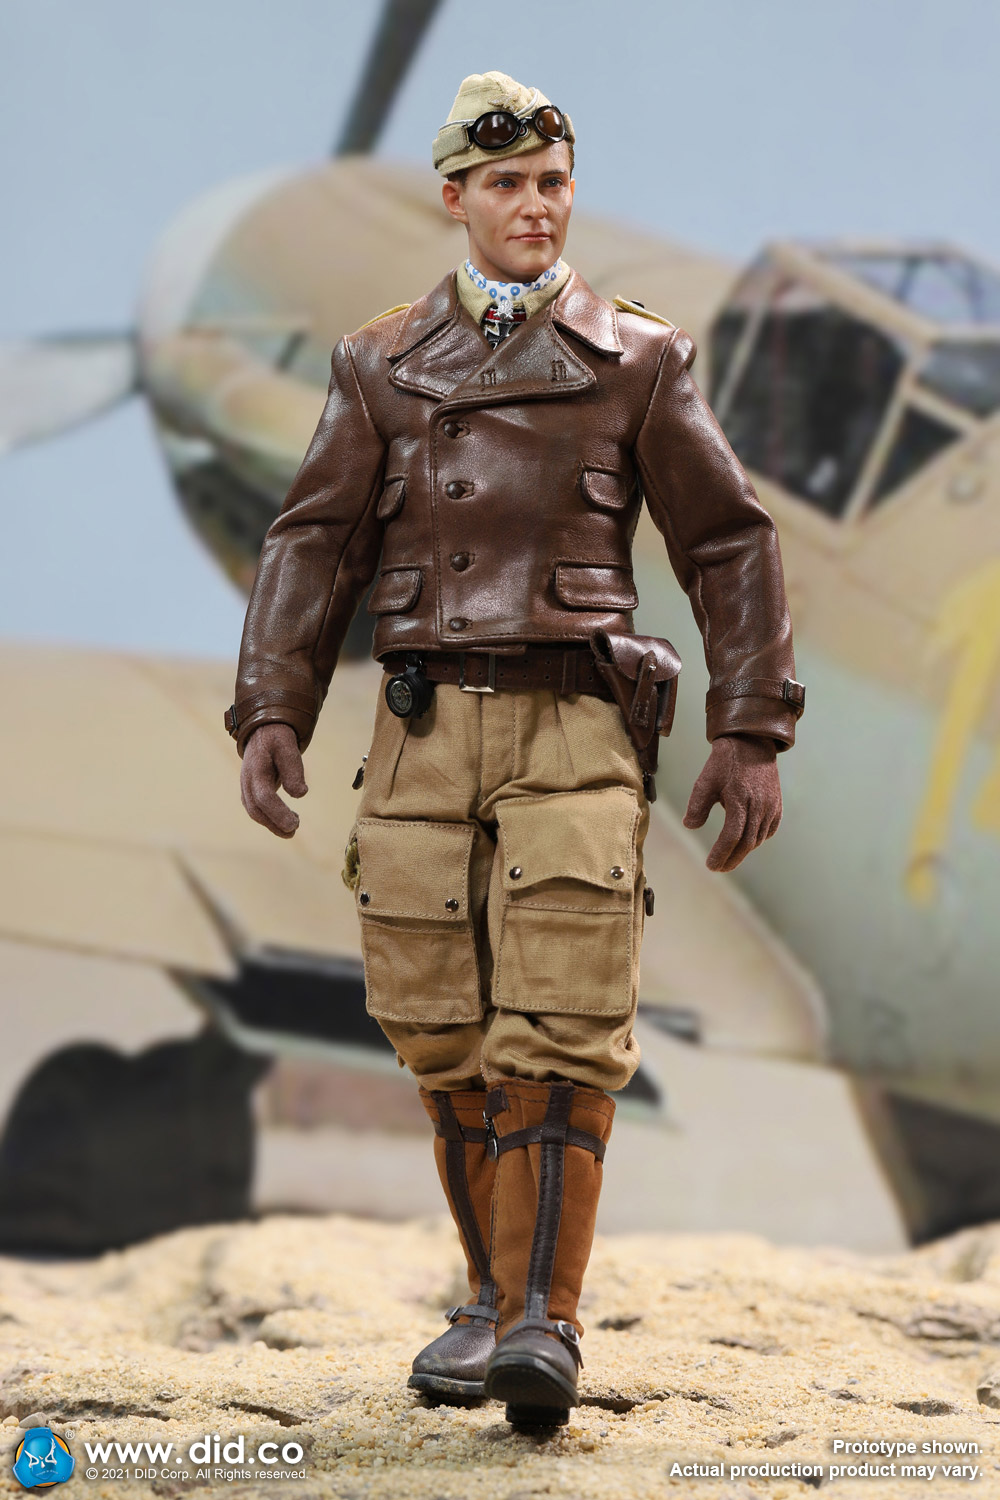 NEW PRODUCT: D80154 WWII German Luftwaffe Flying Ace “Star Of Africa” – Hans-Joachim Marseille & E60060  Diorama Of “Star Of Africa” 13345